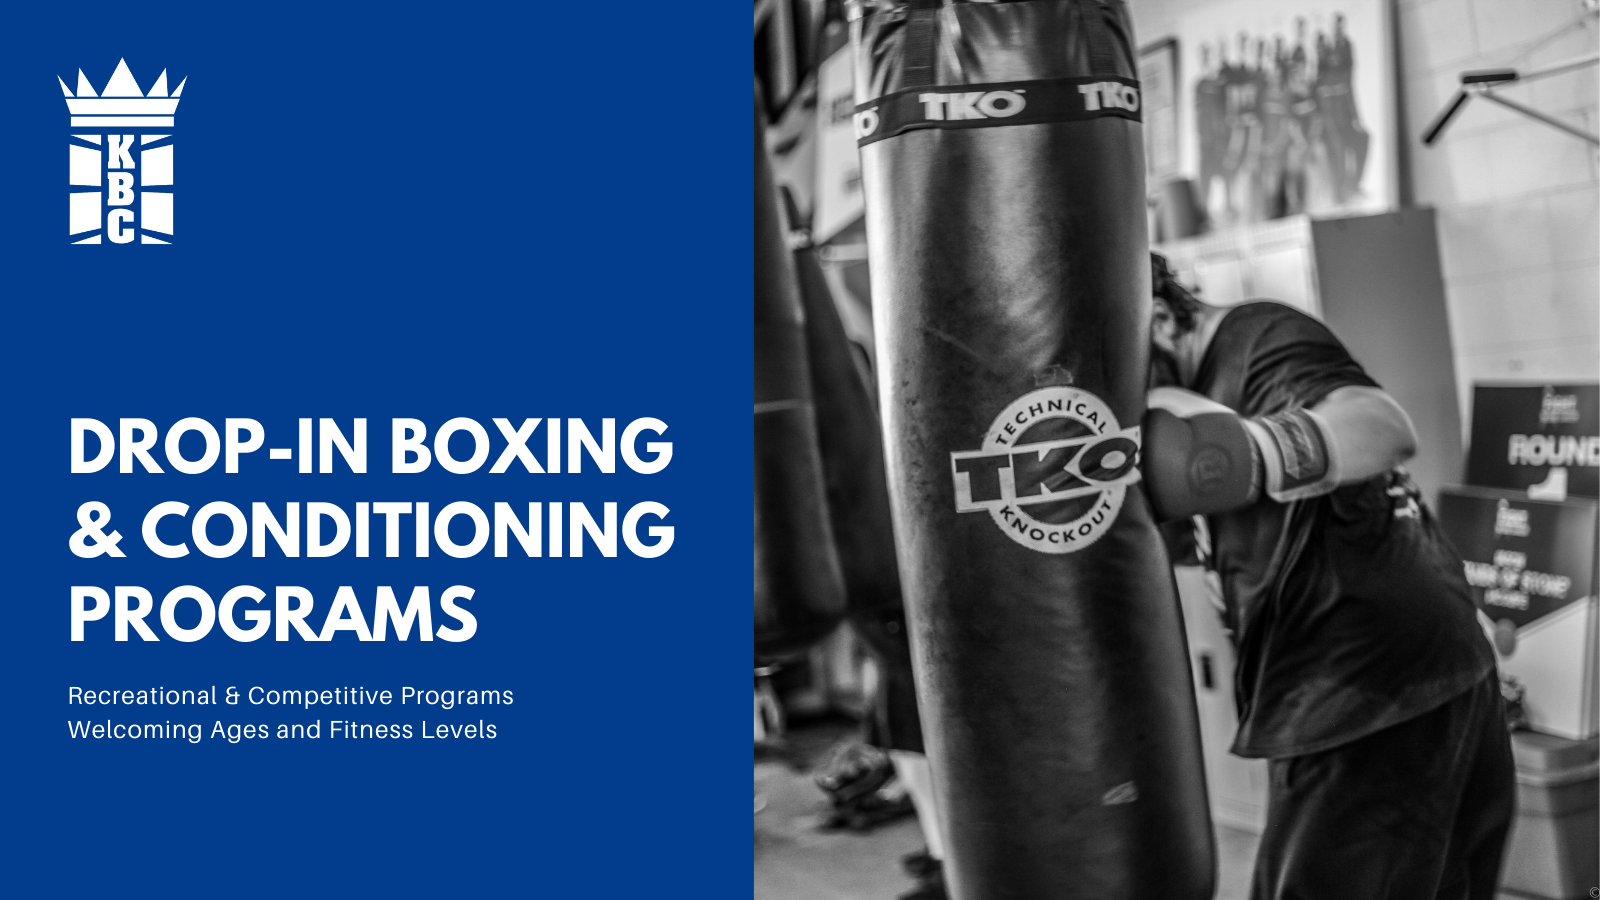 Drop-In Boxing Classes are HERE!